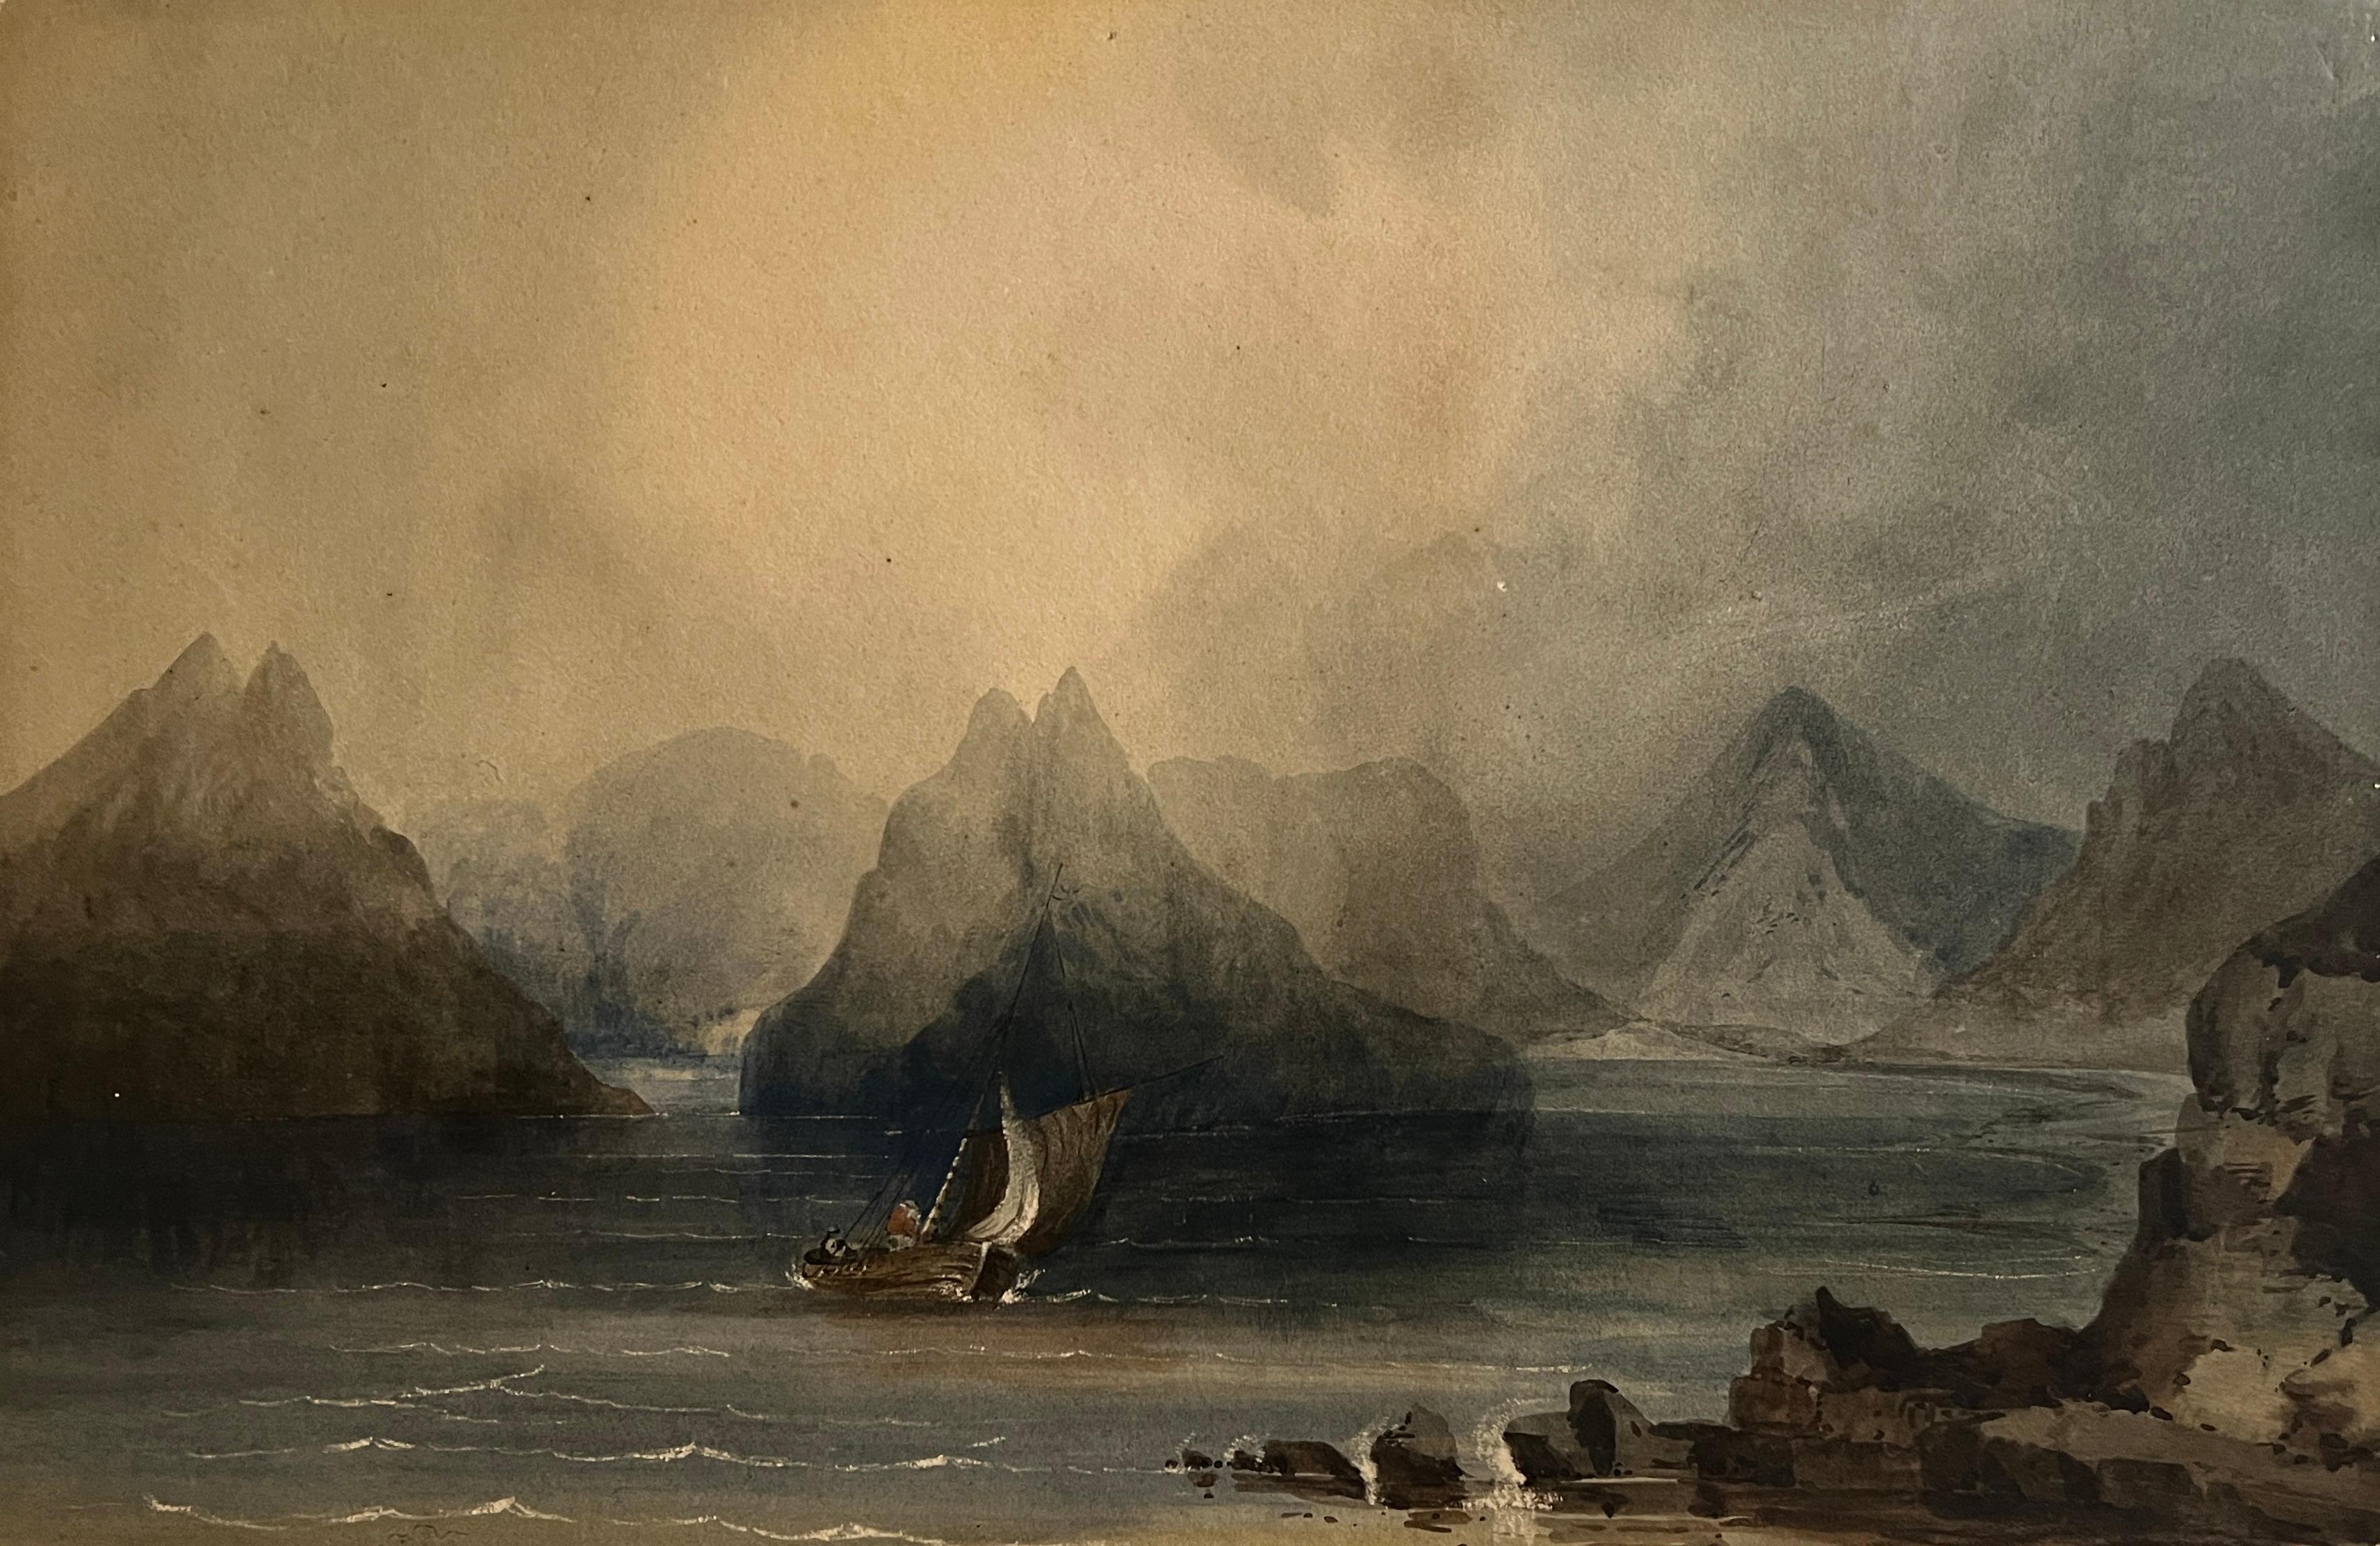 Charles Darwin in the Beagle’s Tender, Coastal Patagonia, Argentina 19th cent wc